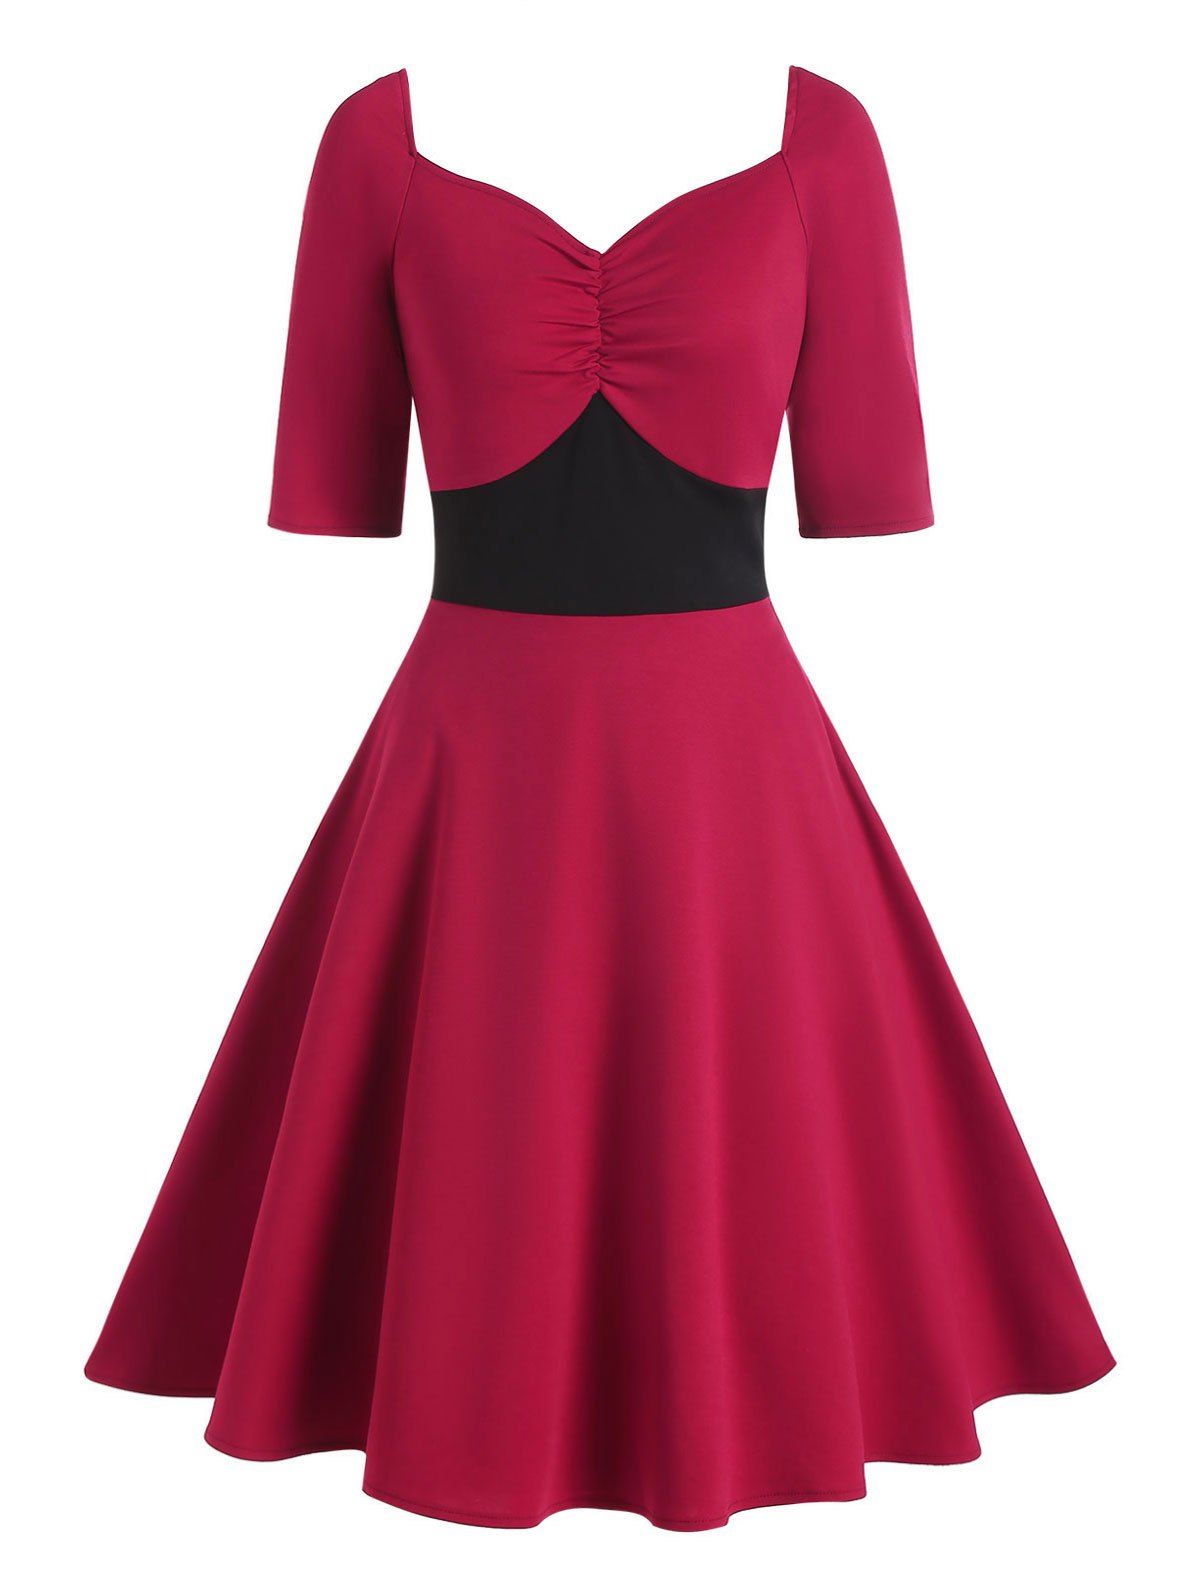 Ruched Colorblock Empire Waist Dress - RED S